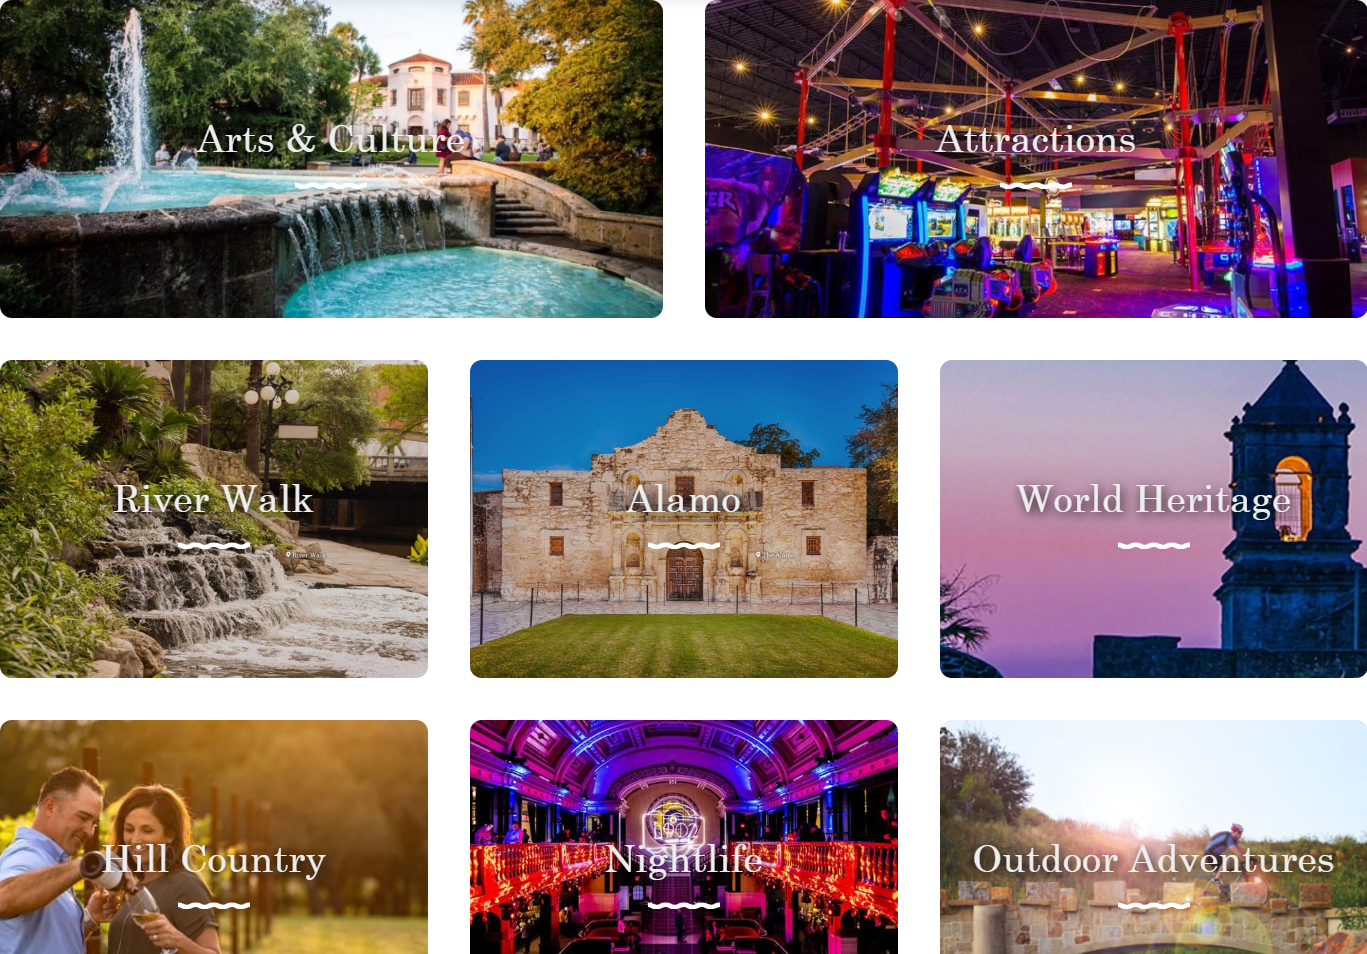 San Antonio things to do, Arts & Culture, Attractions, River Walk, Alamo, World Heritage, Hill Country, Nightlife, Outdoor Adventures